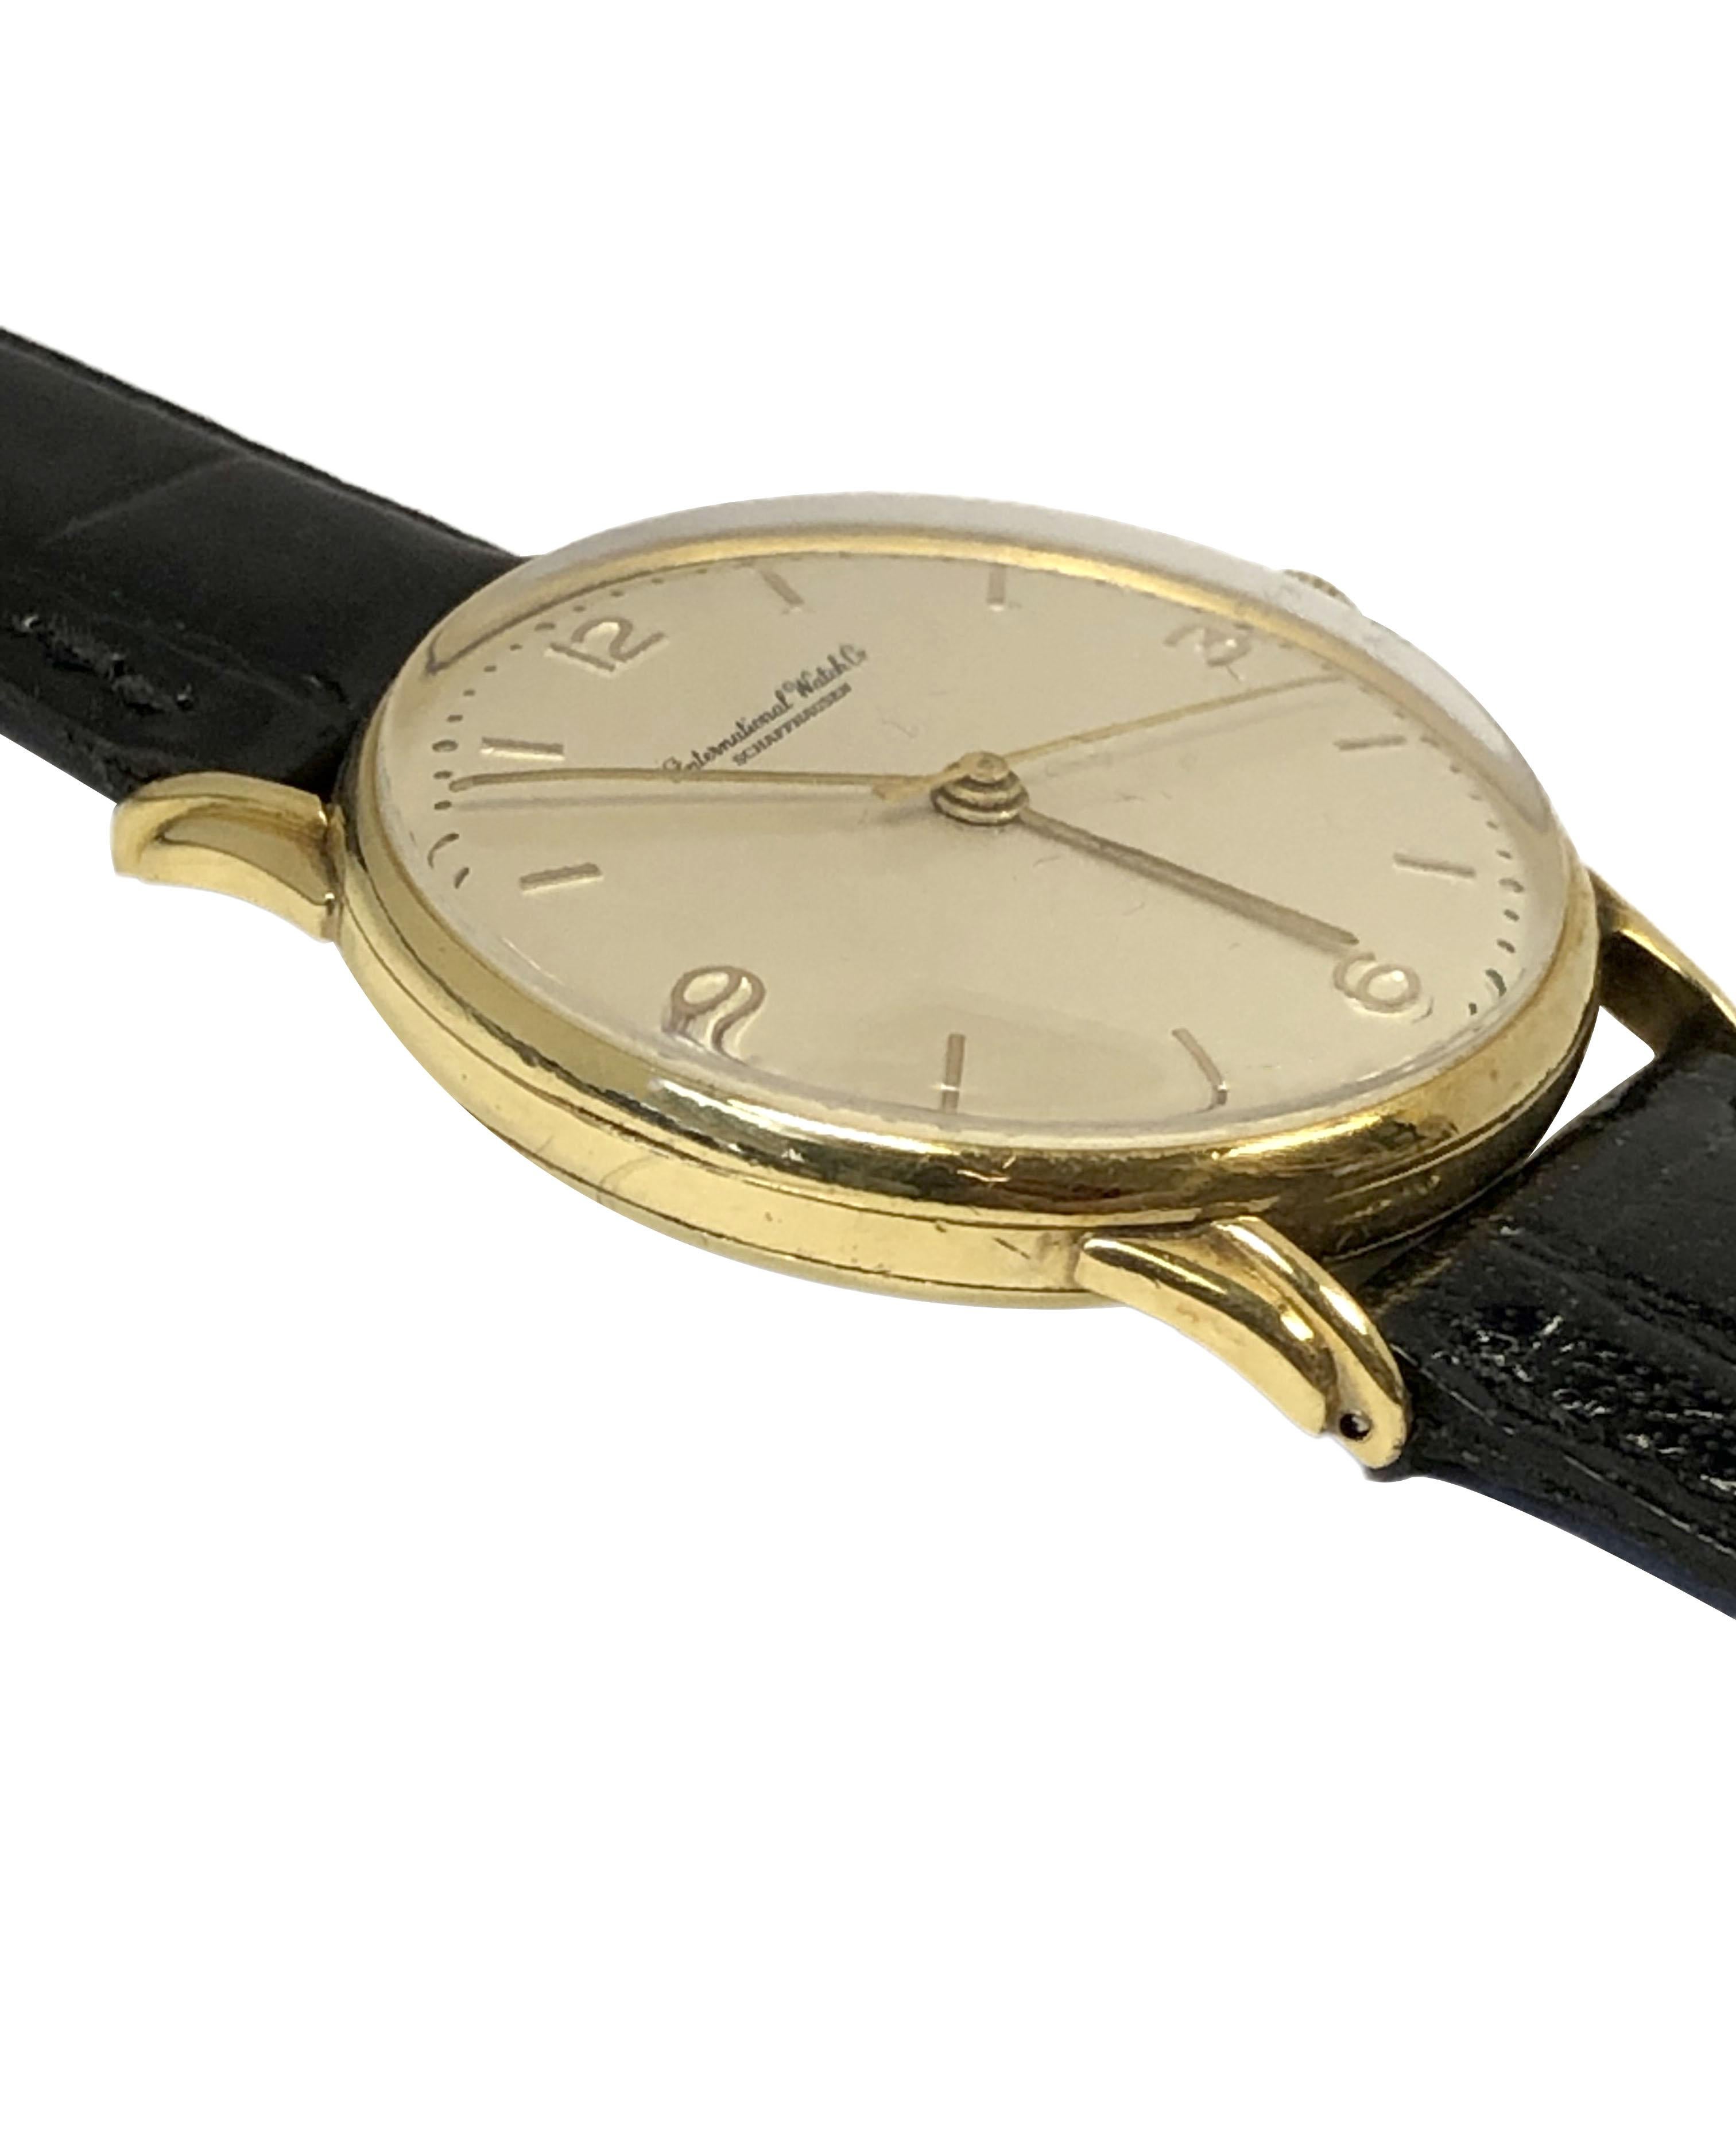 Circa 1950 IWC International Watch Co. Schaffhausen Wrist Watch, 34 M.M. 18k Yellow Gold 3 piece case with fancy stepped lugs. Mechanical, Manual wind movement, original Mint condition Silver Satin dial with raised Gold markers. New Black Croco